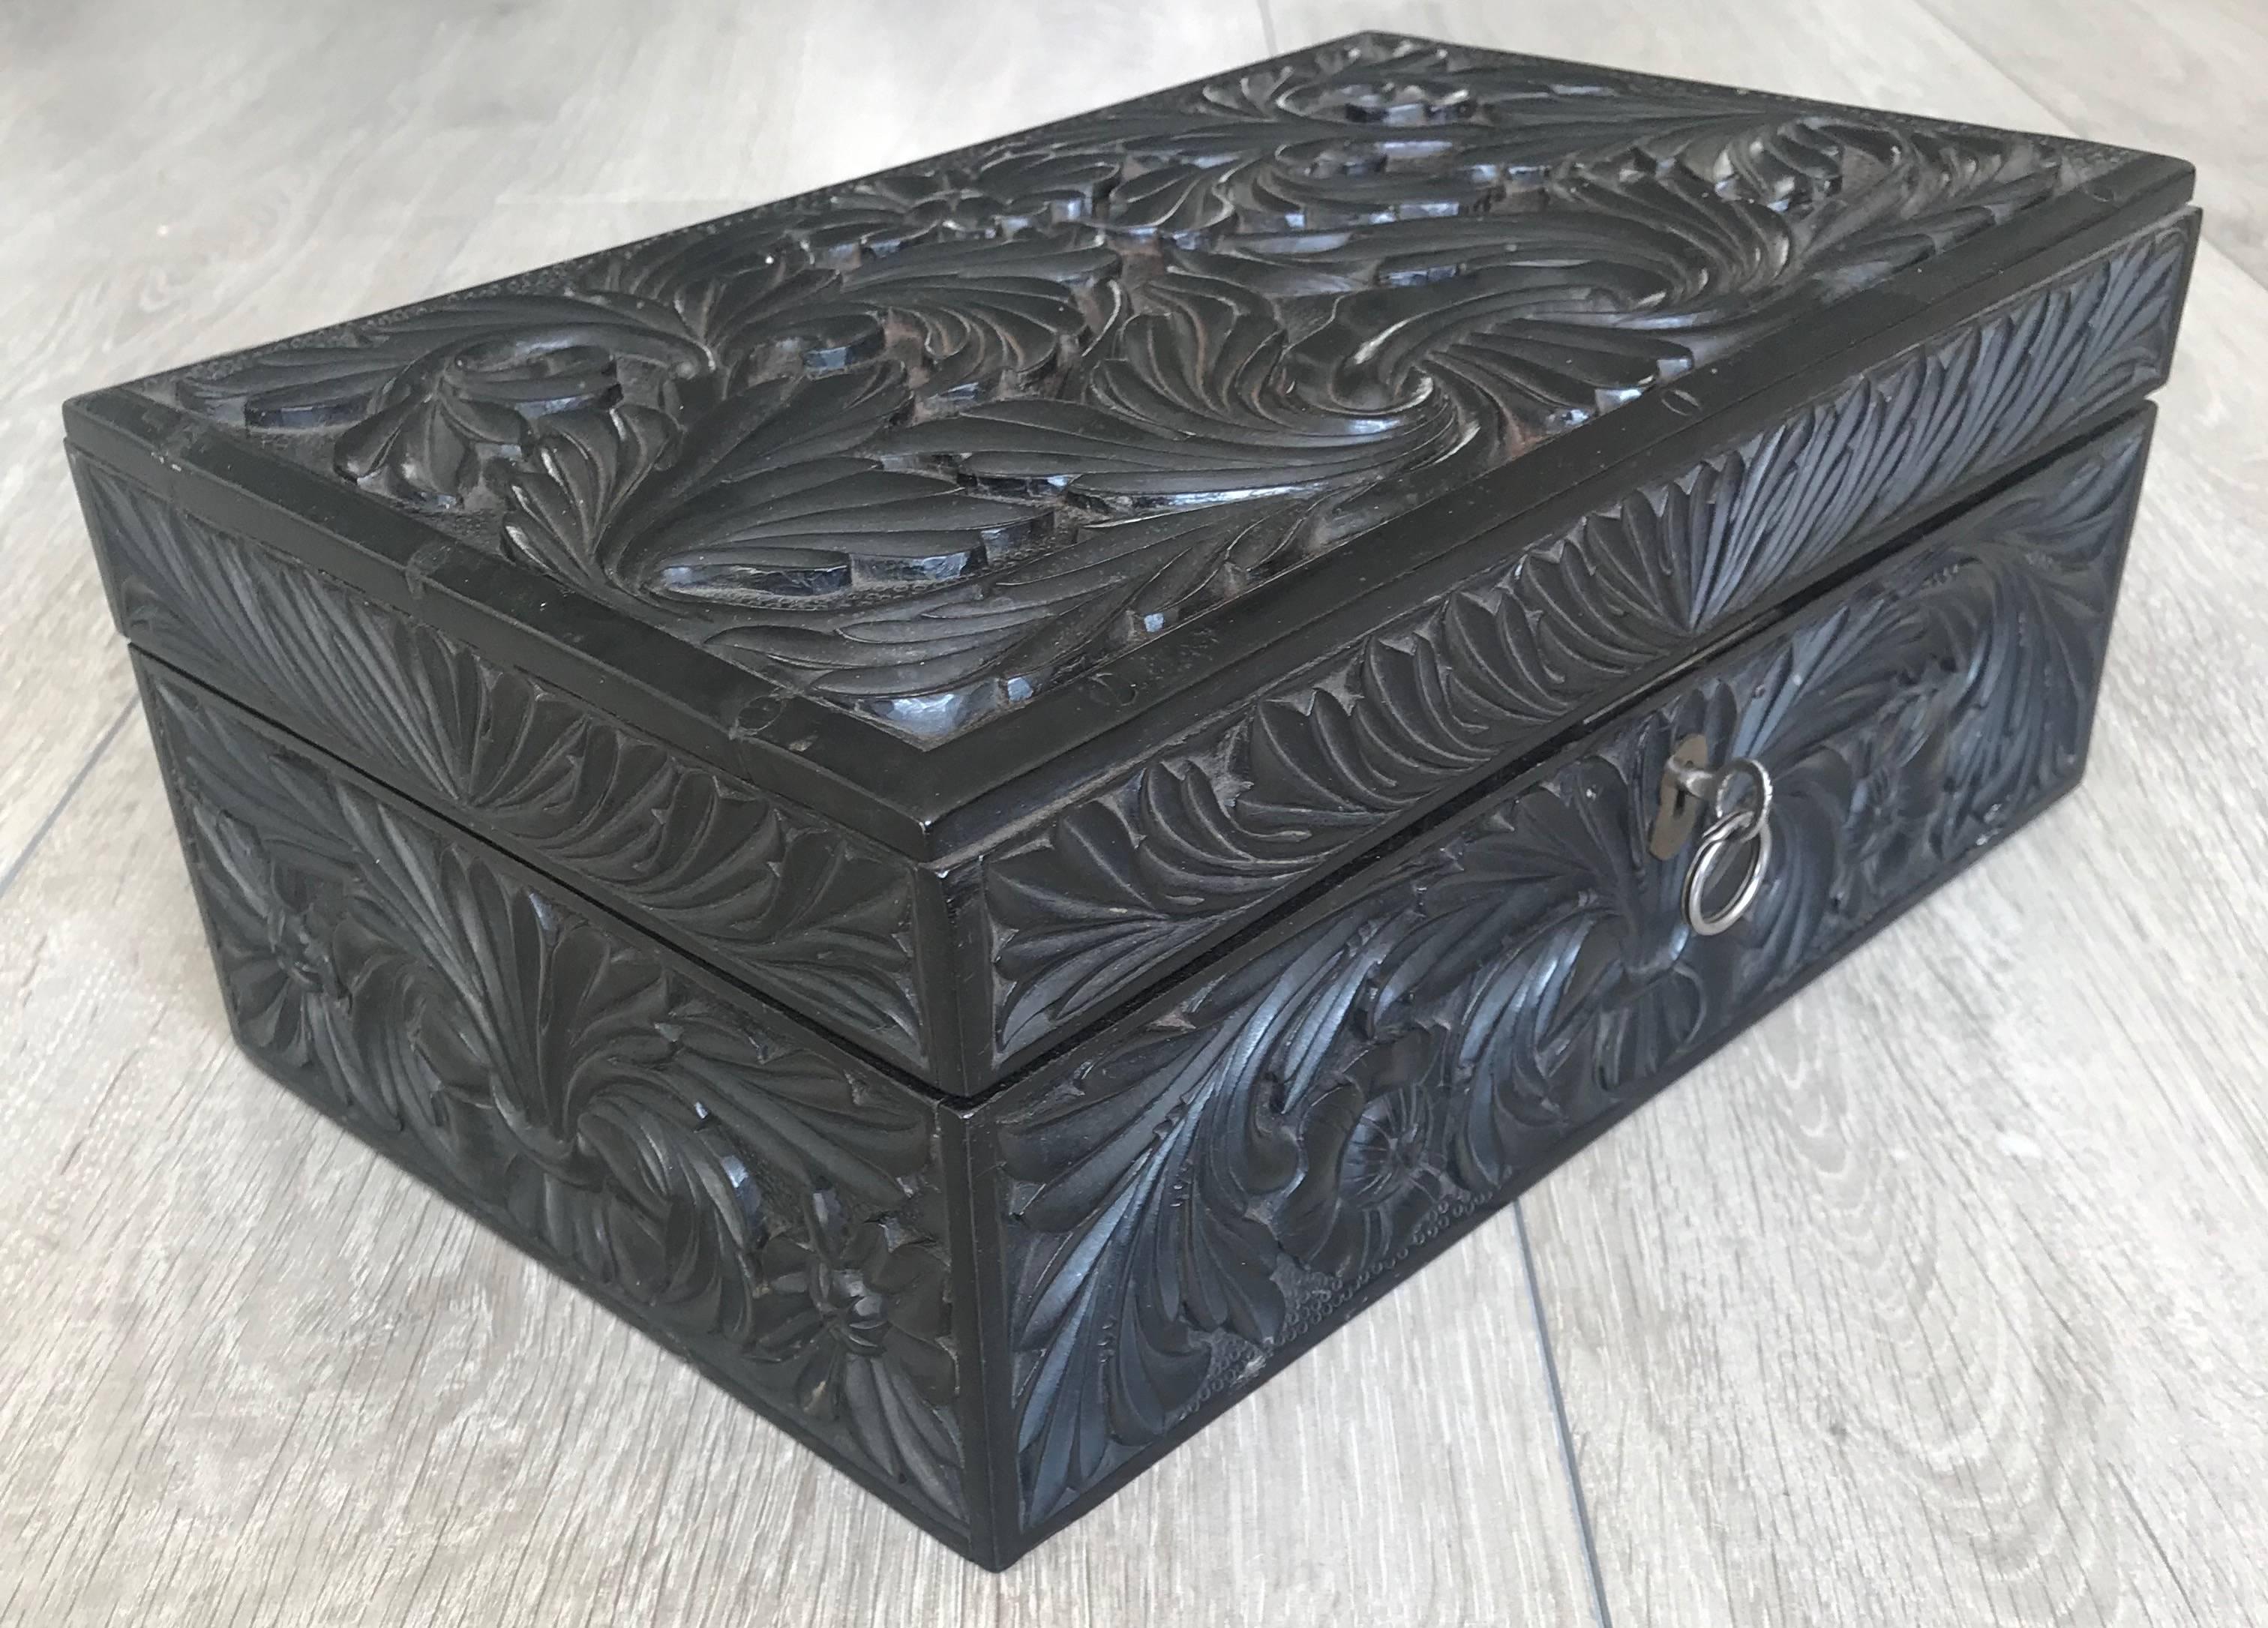 Asian Antique 19th Century Fine Quality Carved Scrolling Ceylon Hardwood Box or Casket